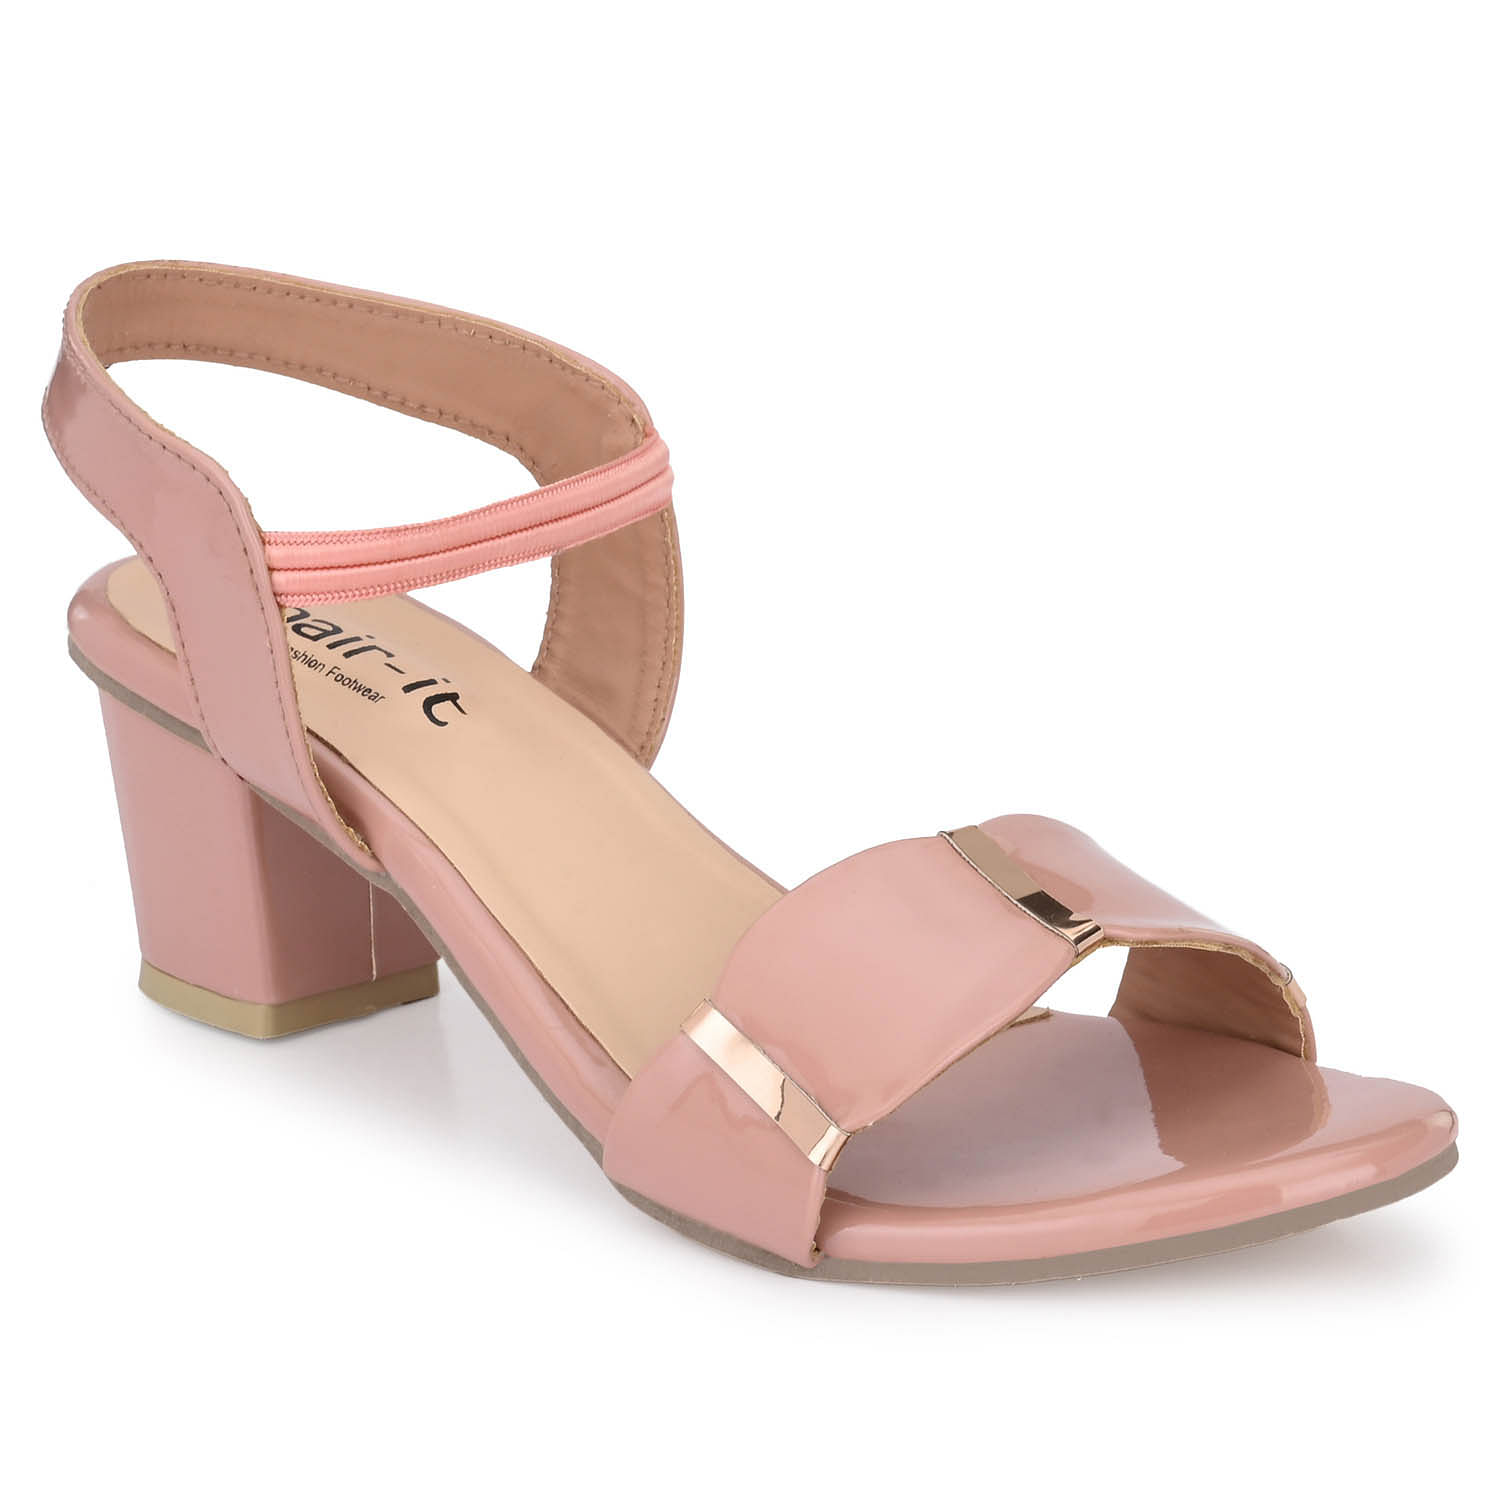 25 Cute Summer Sandals for 2021: Block Heels, Strappy Styles & More |  Glamour